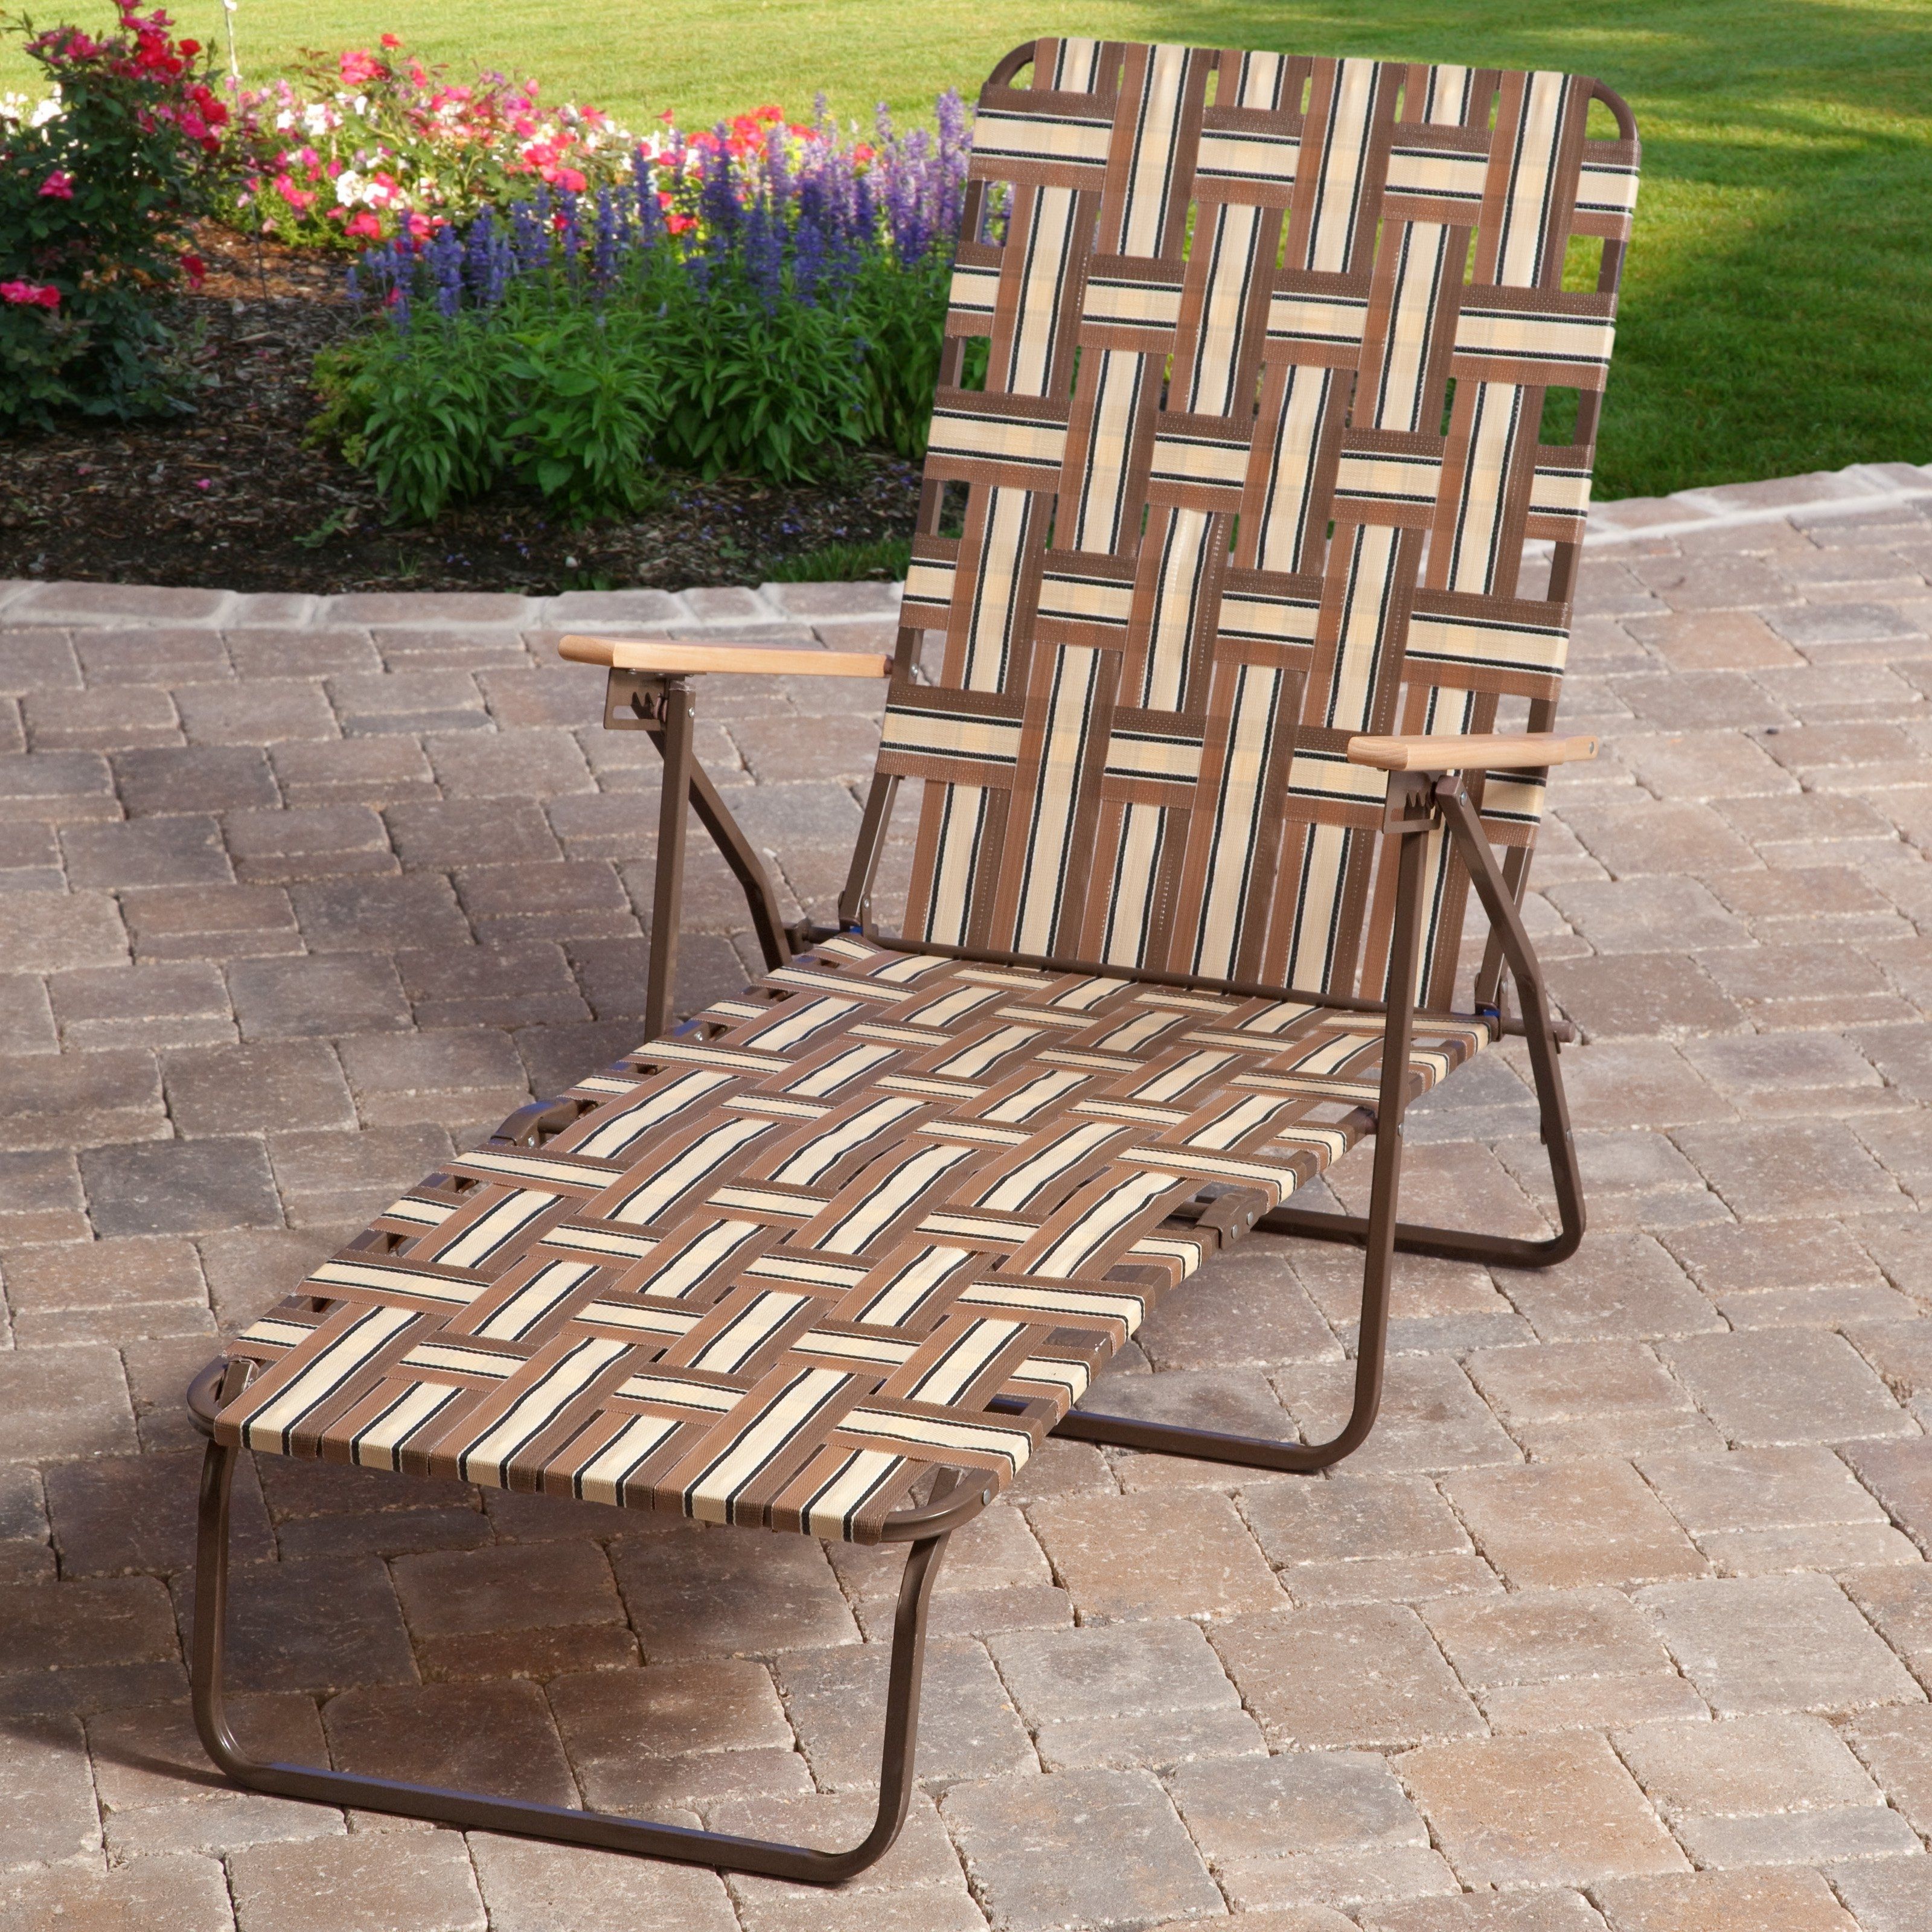 Chaise Lounge Lawn Chairs For Most Recent Rio Deluxe Folding Web Chaise Lounge – Walmart (View 7 of 15)